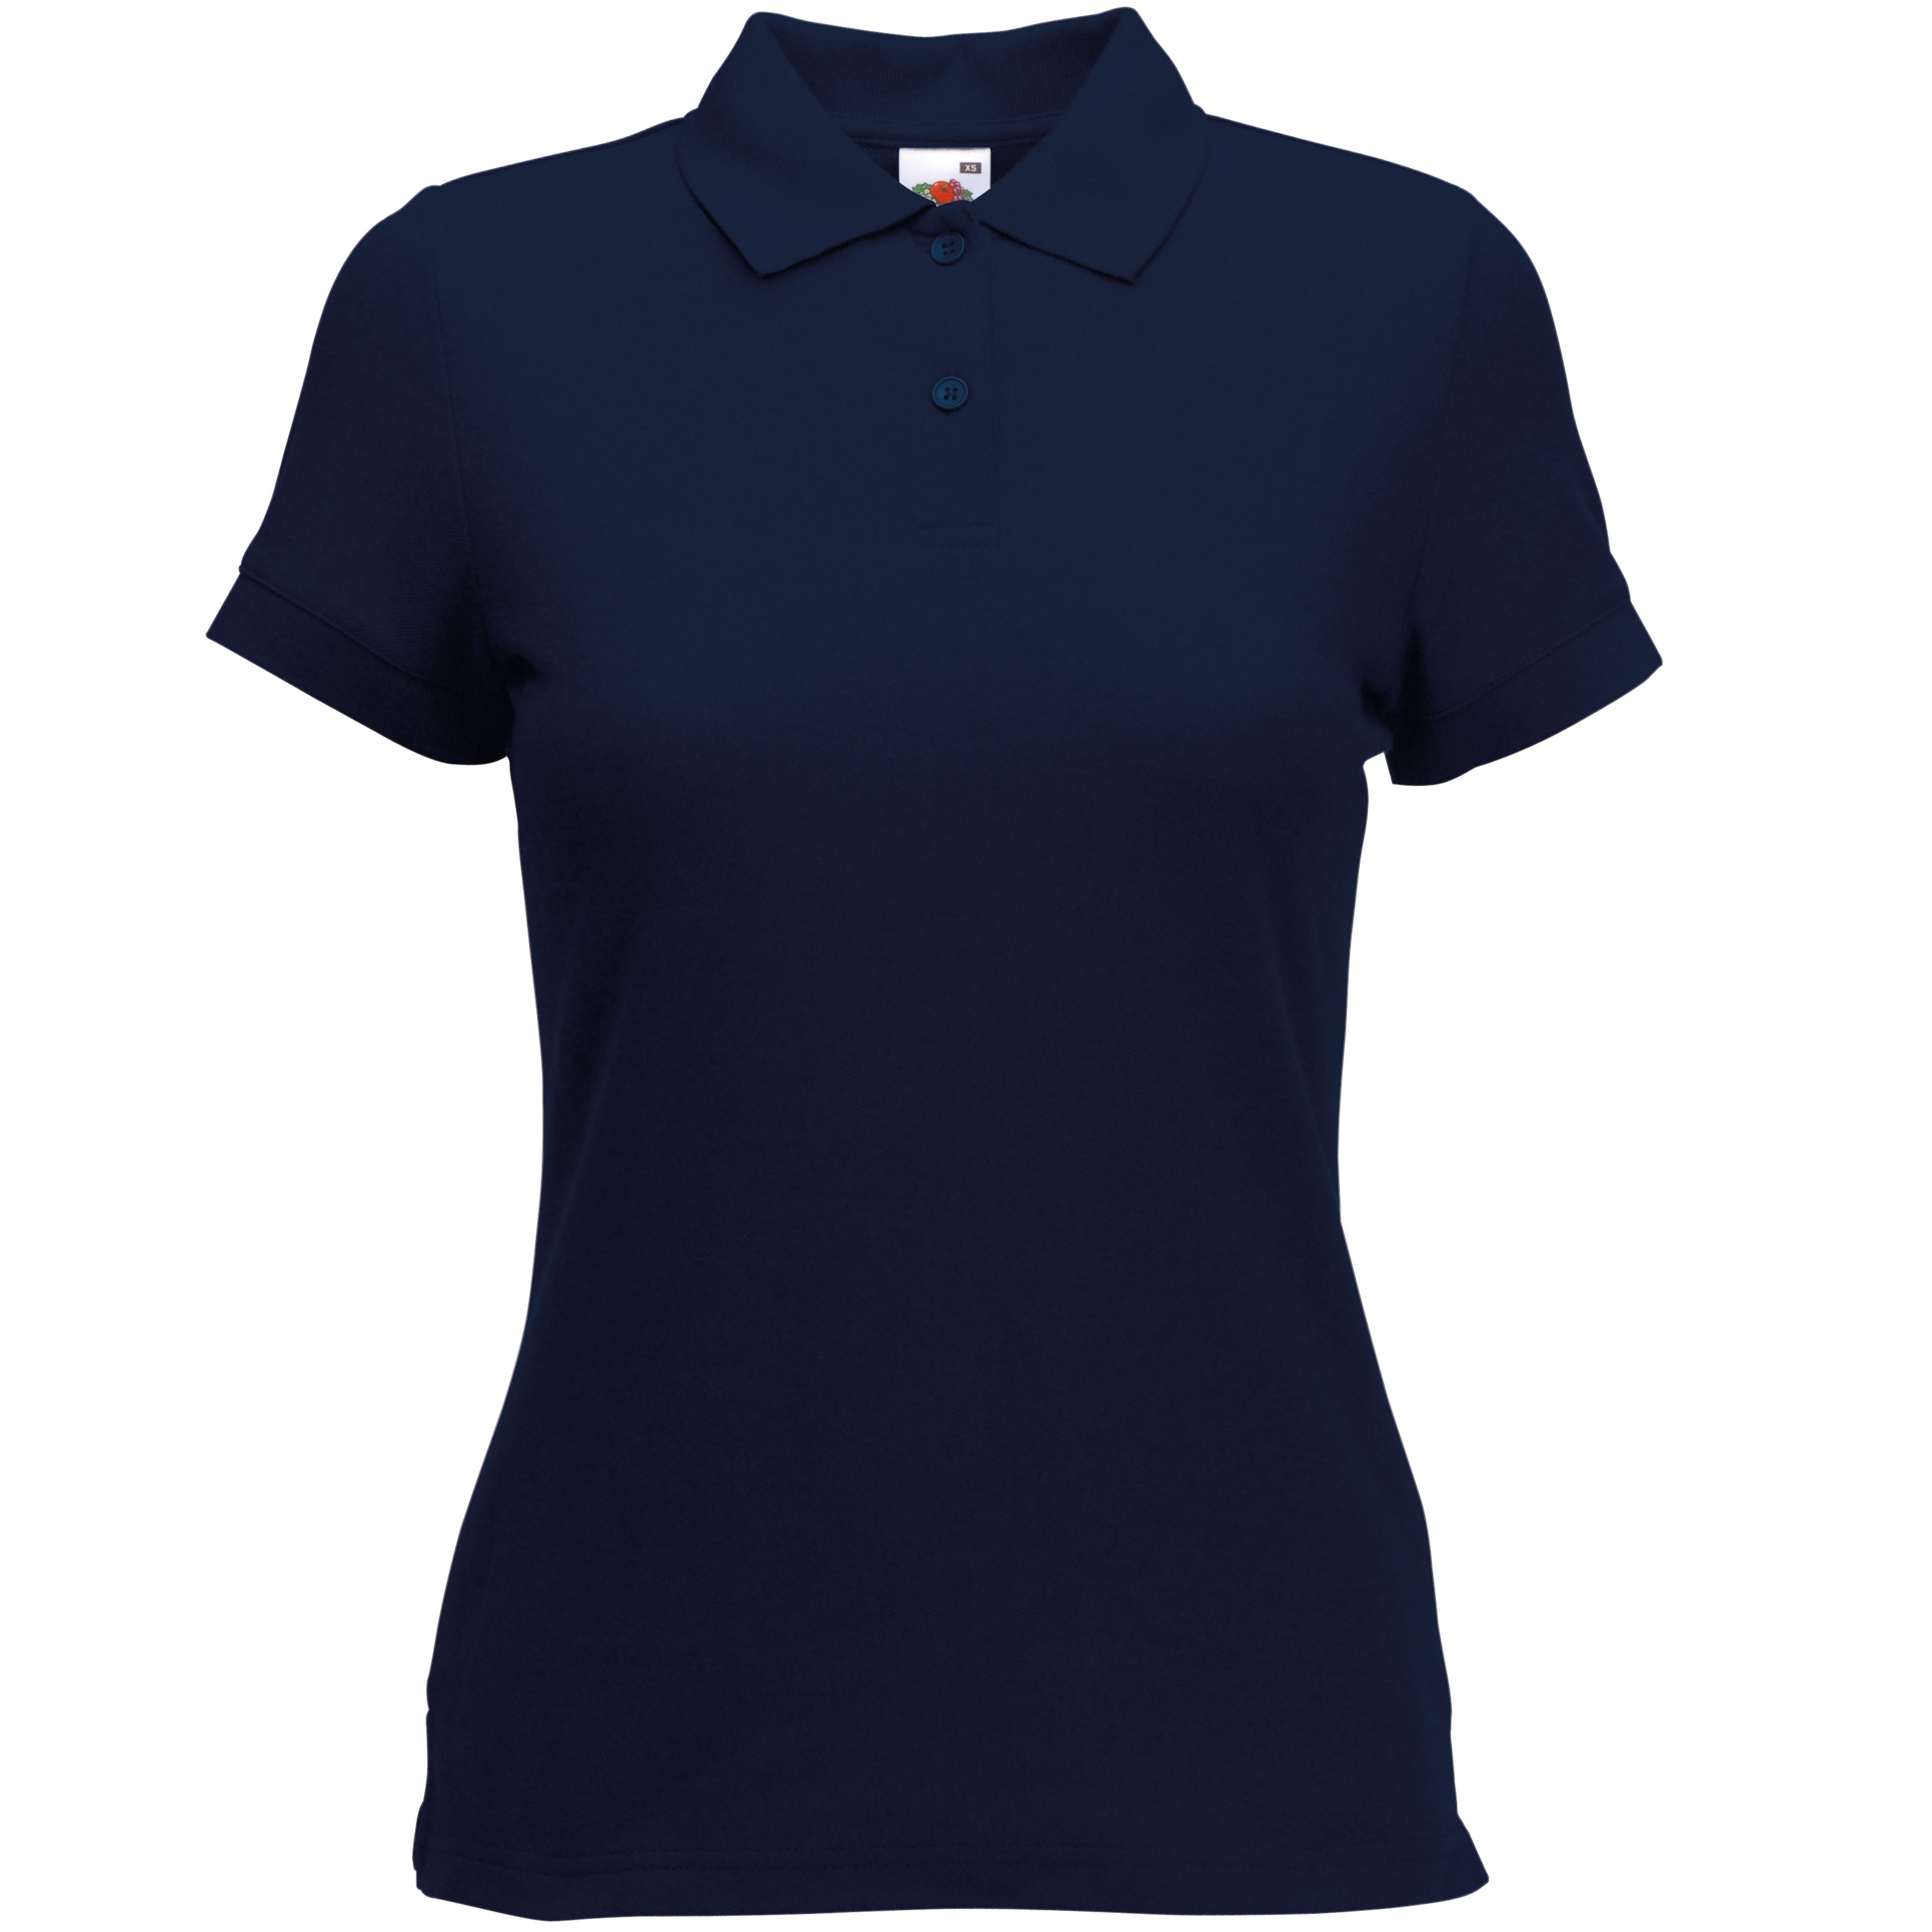 ax-httpswebsystems.s3.amazonaws.comtmp_for_downloadfruit-of-the-loom-ladies-65-35-polo-deep-navy.jpg